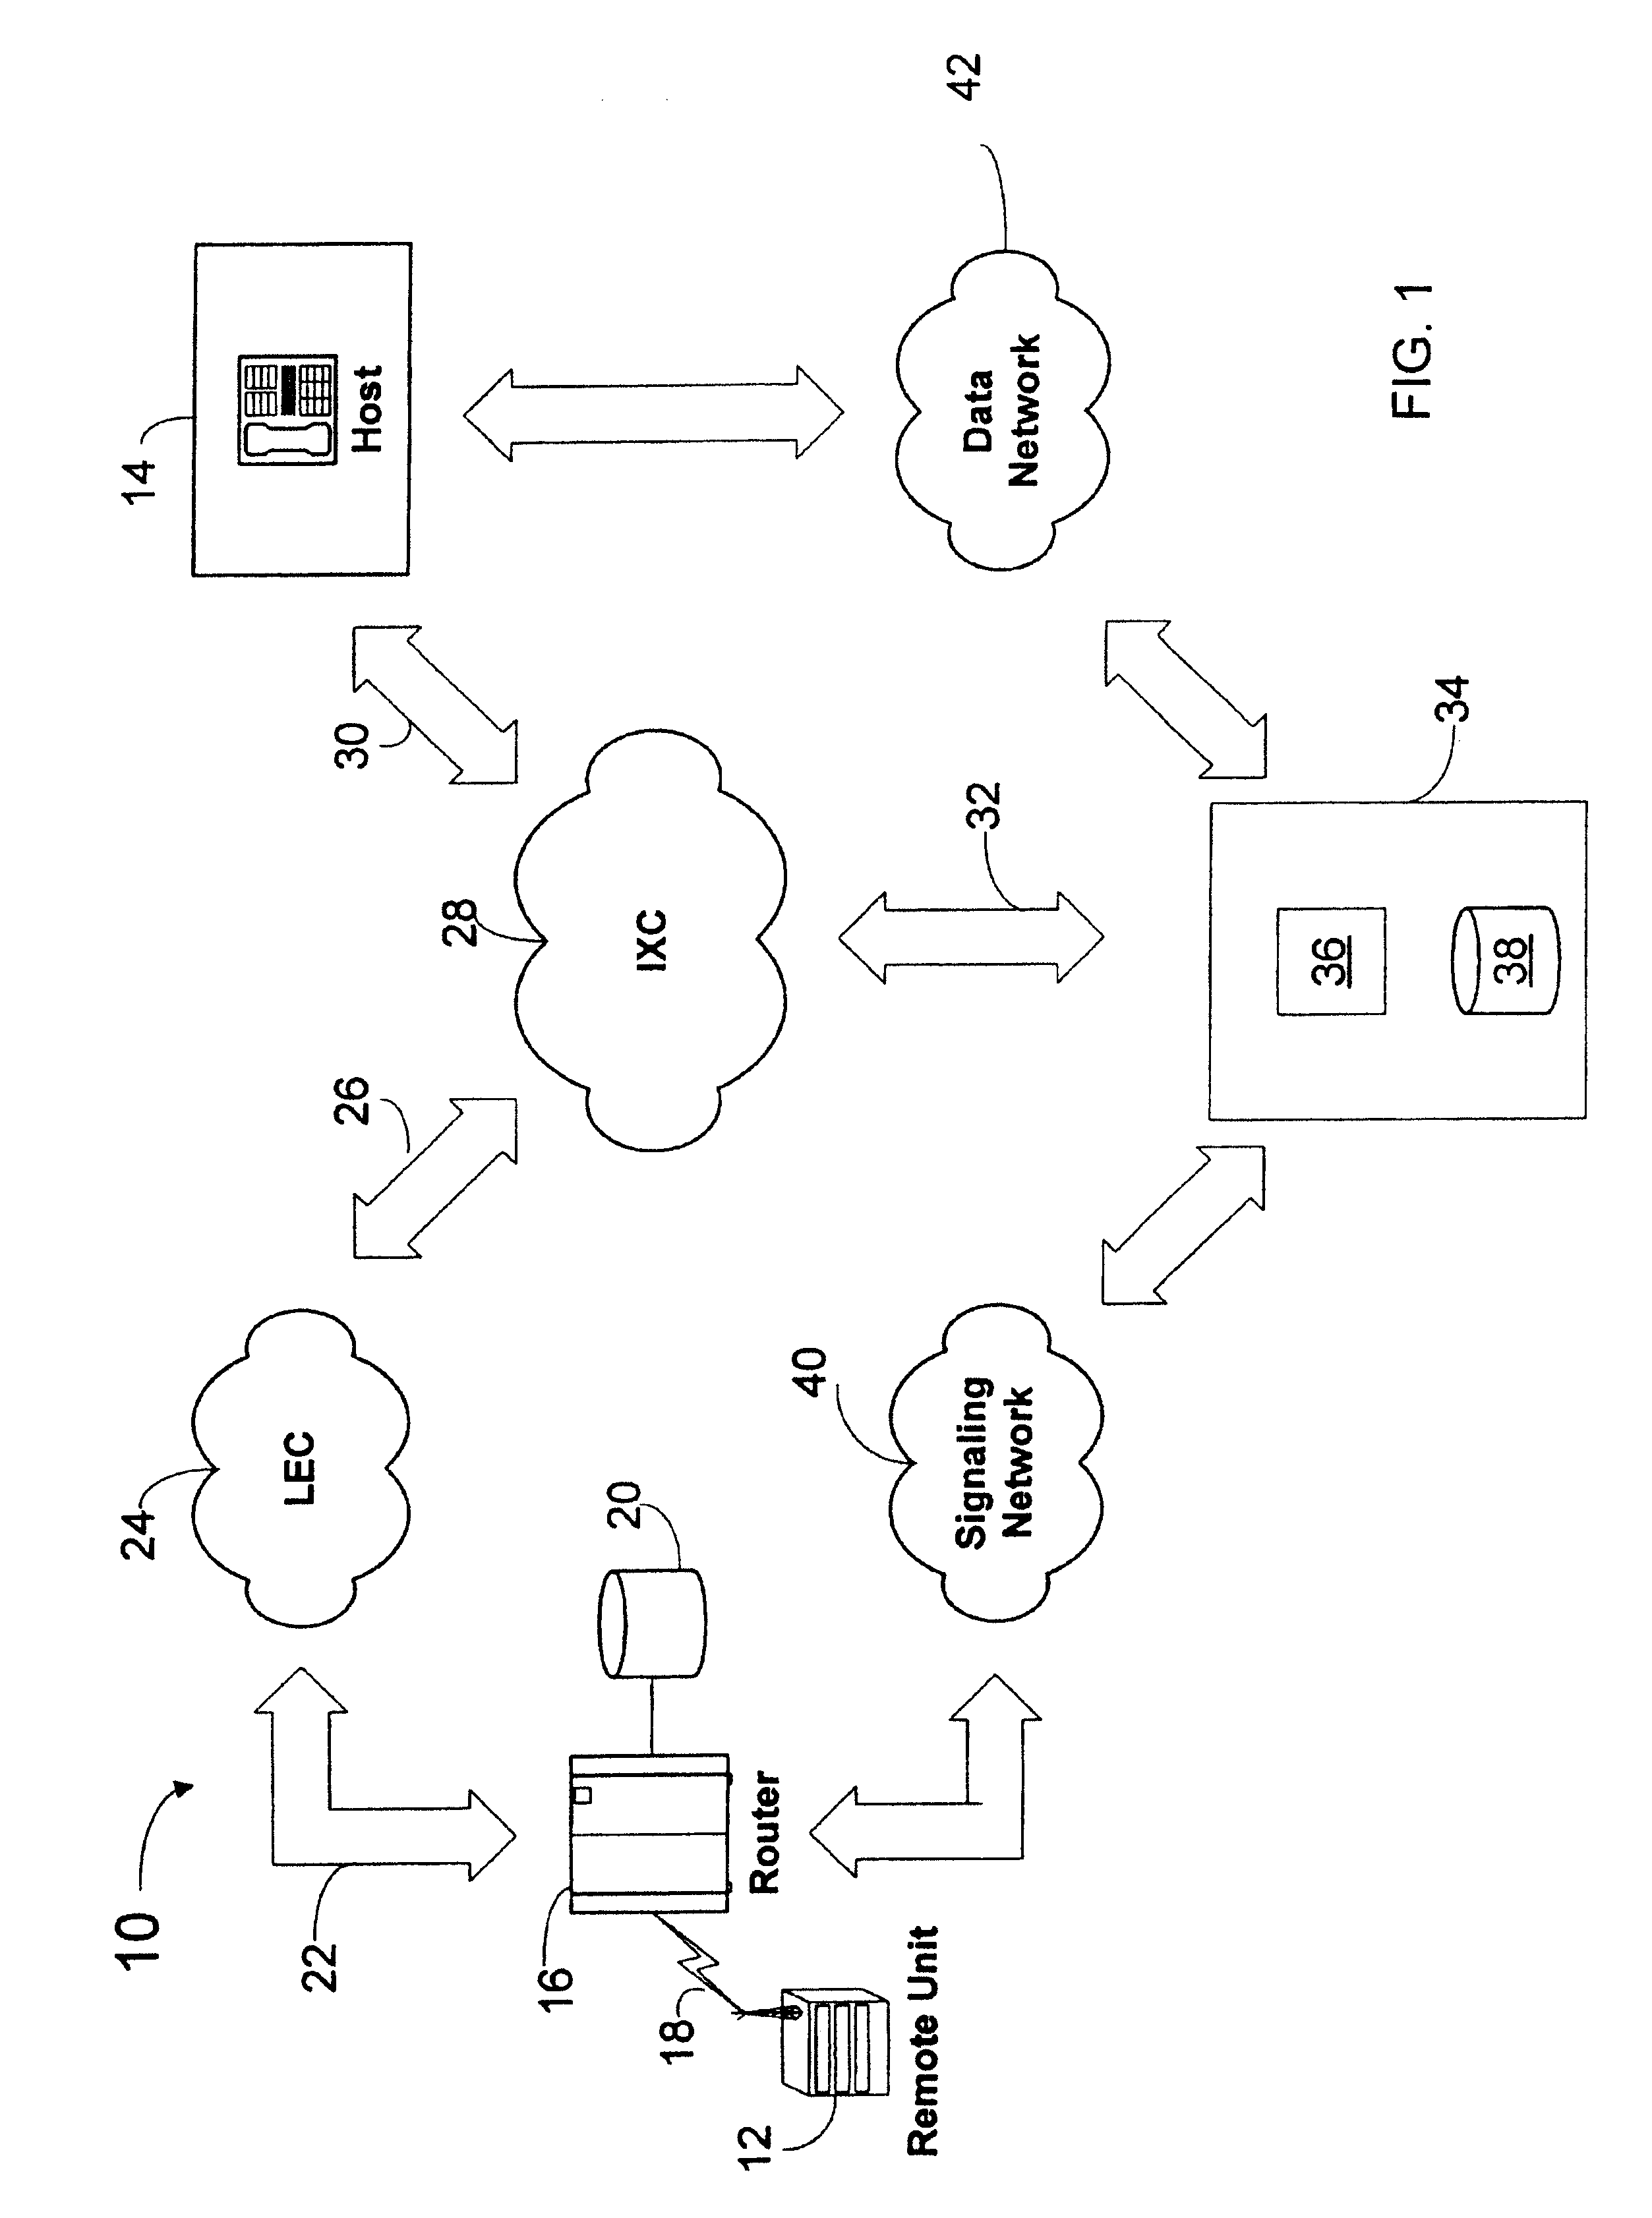 Method and system for authorization, routing, and delivery of transmissions